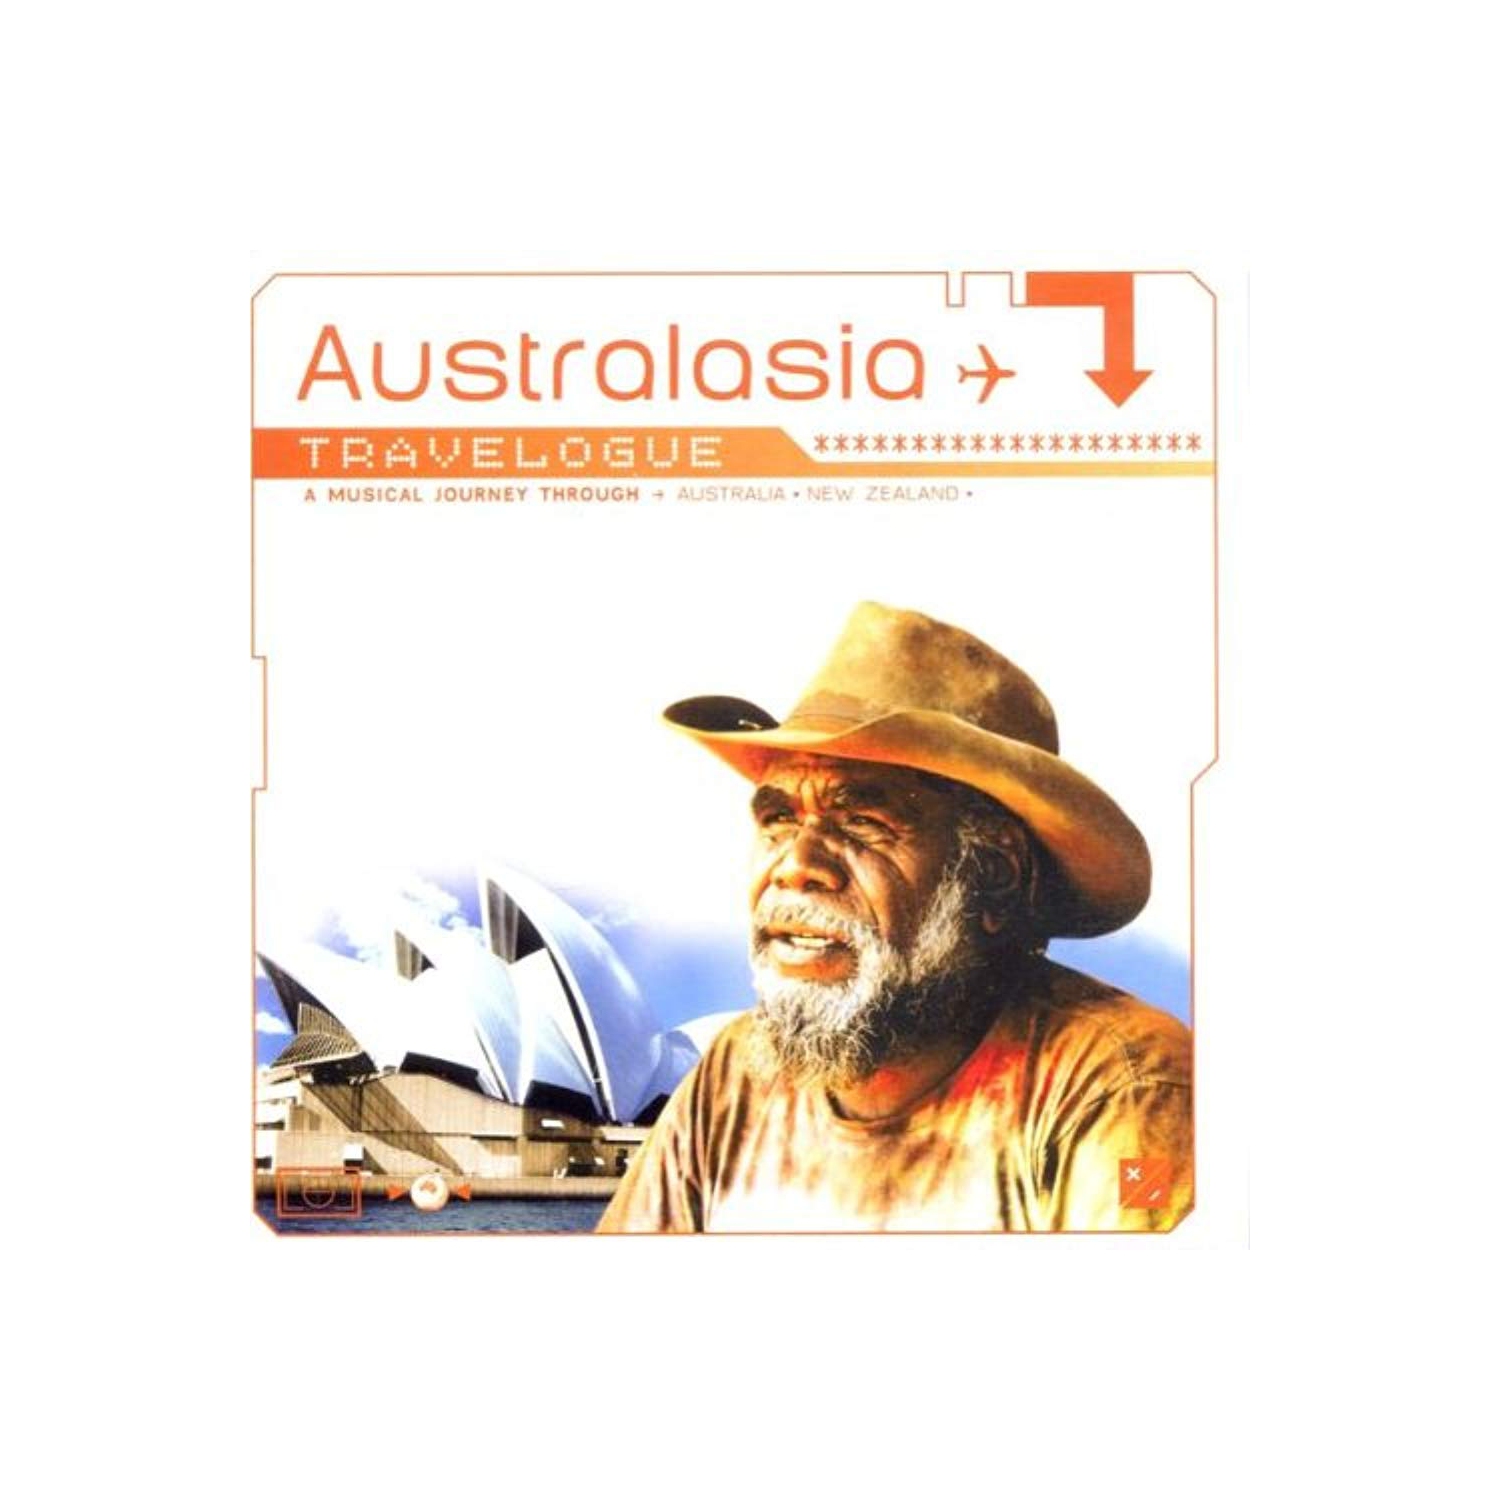 A Musical Journey Through Australia and New Zealand [Audio CD] Various Artists; Traditional; T.C. Kelly; Troy